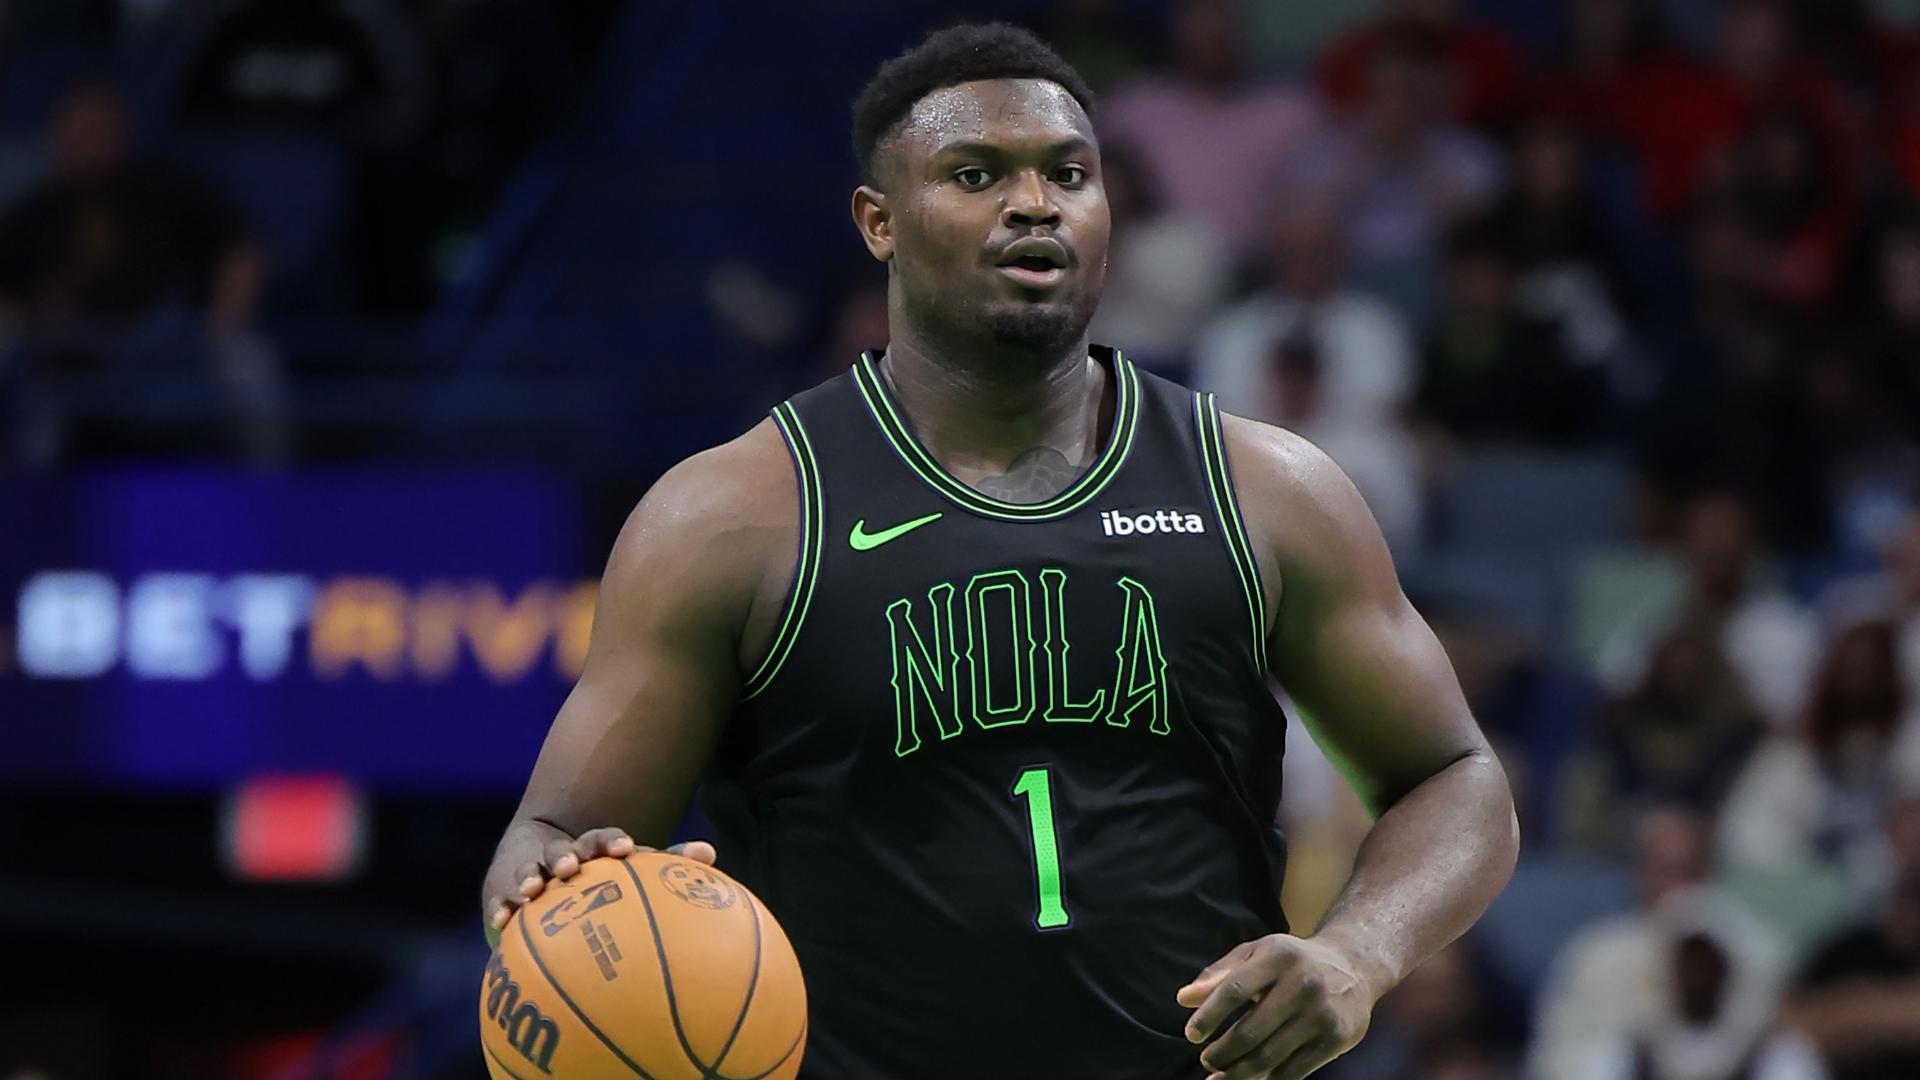 Zion Williamson's Potential New Horizons Analyzing Trade Destinations